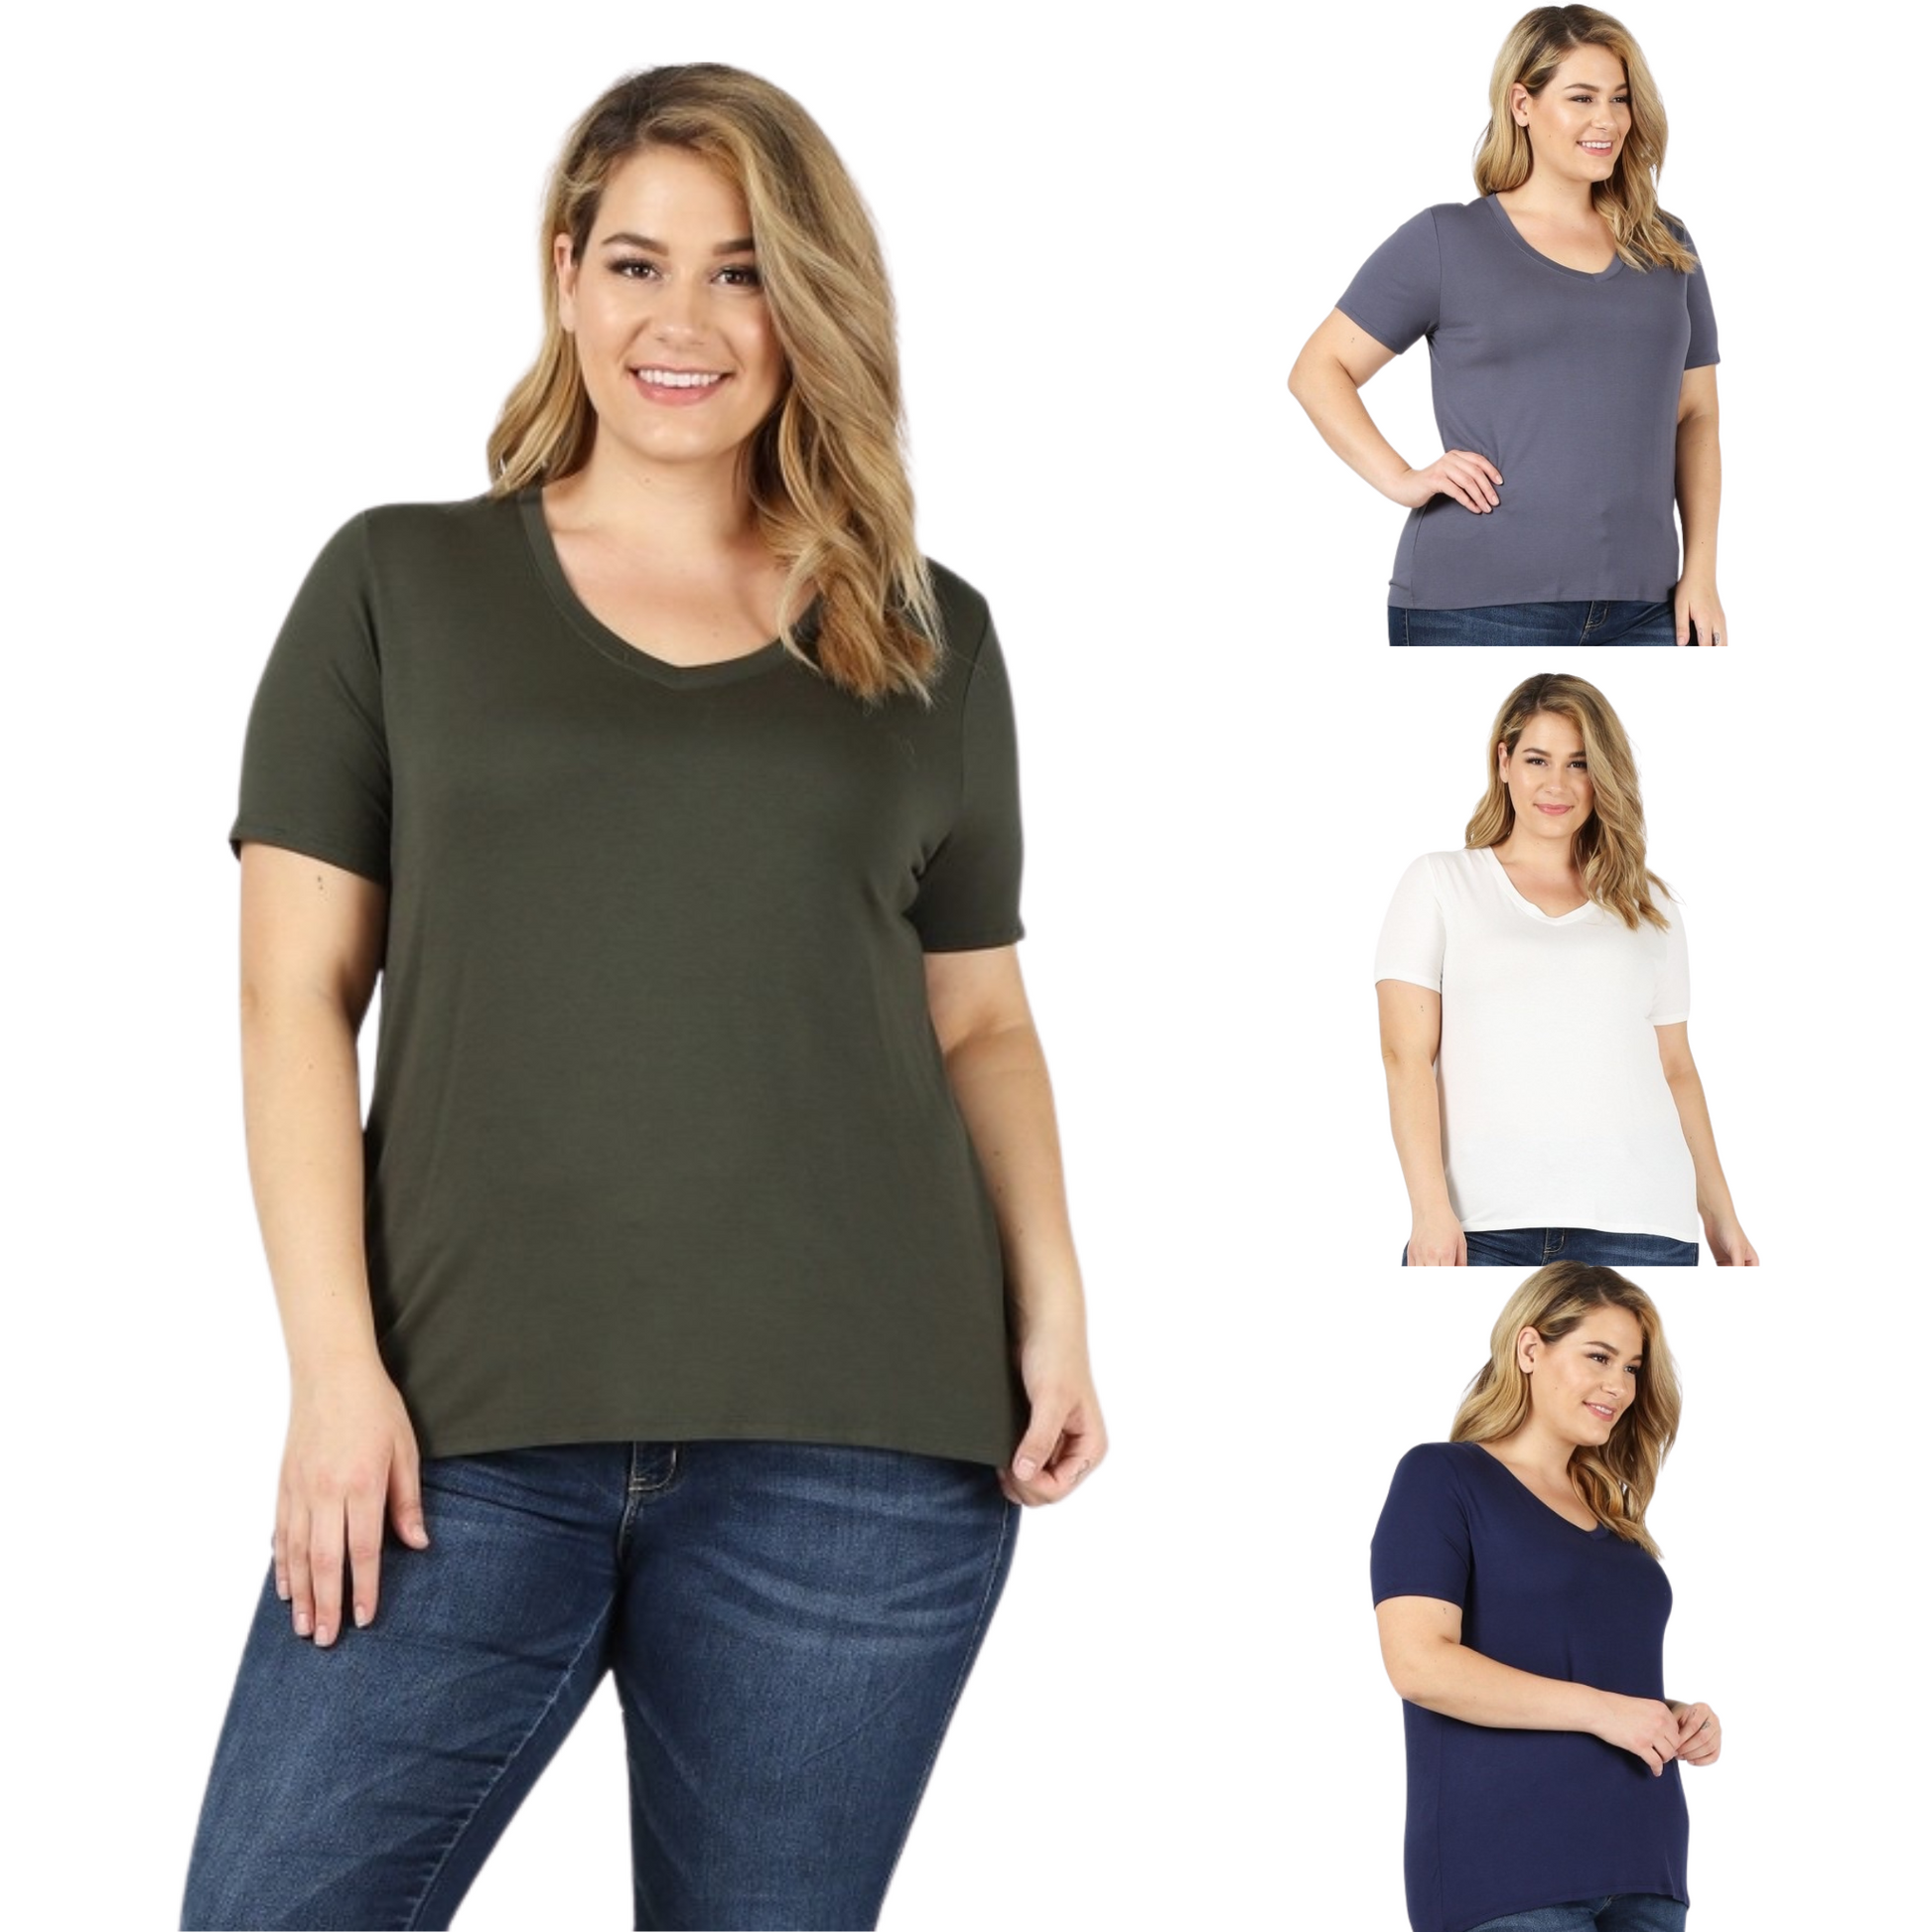 This V-Neck Tee is designed with plus size customers in mind, and is available in grey, navy, green, white, and black colors. It has a comfortable v neck and short sleeves, and is crafted from lightweight fabric. Perfect for casual and warm weather wear.